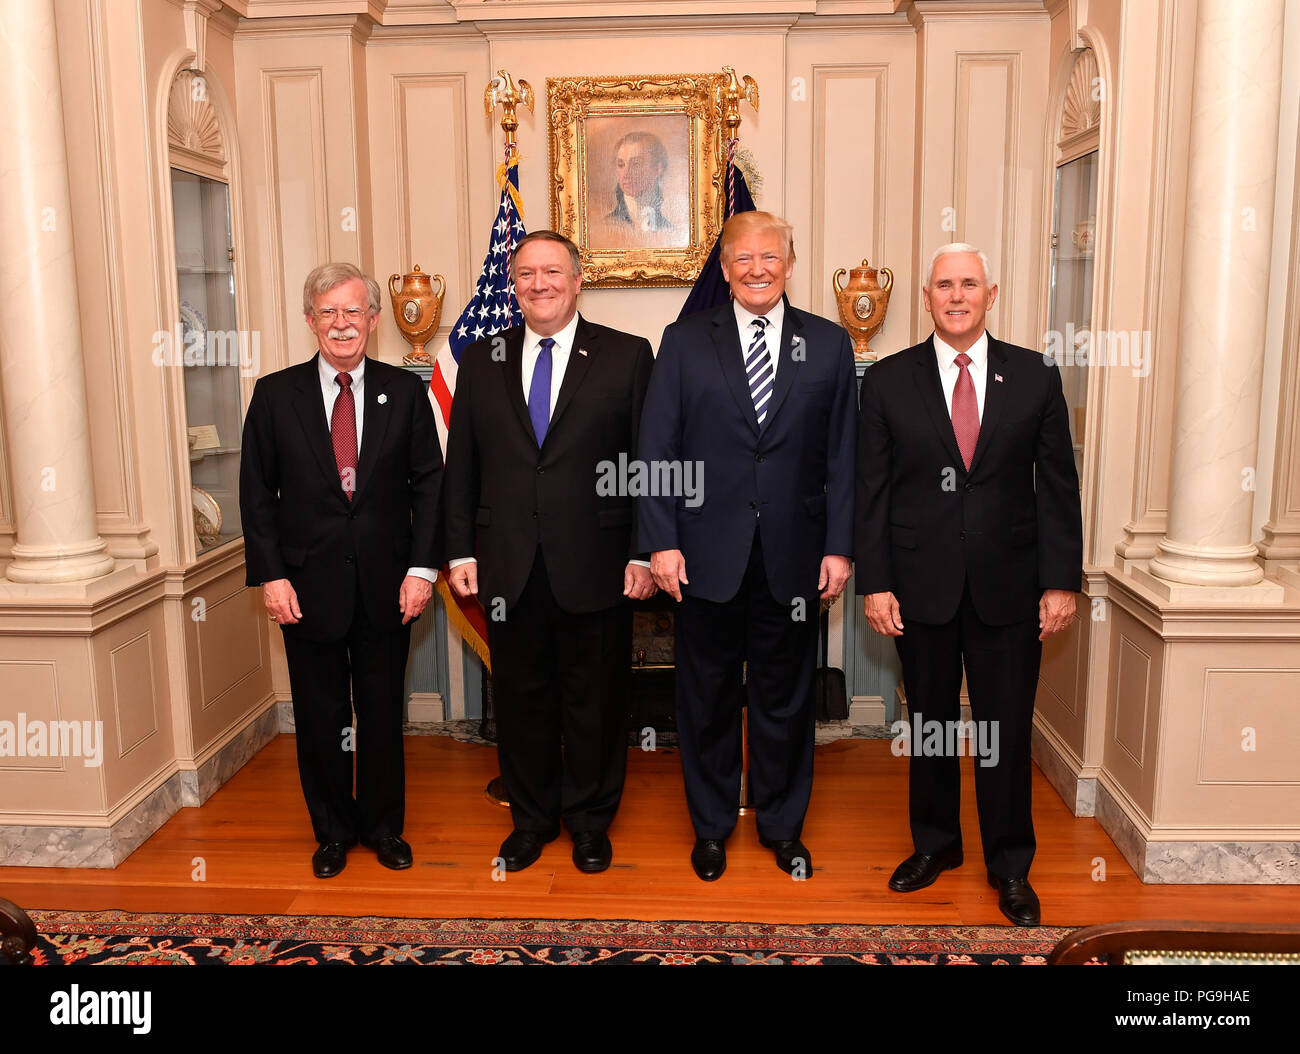 U.S. Secretary of State Mike Pompeo poses for a photo with (L to R) National Security Advisor of the United States John Bolton, President Donald J. Trump and Vice President Mike Pence before his swearing-in ceremony at the U.S. Department of State in Washington, D.C., on May 2, 2018. Stock Photo